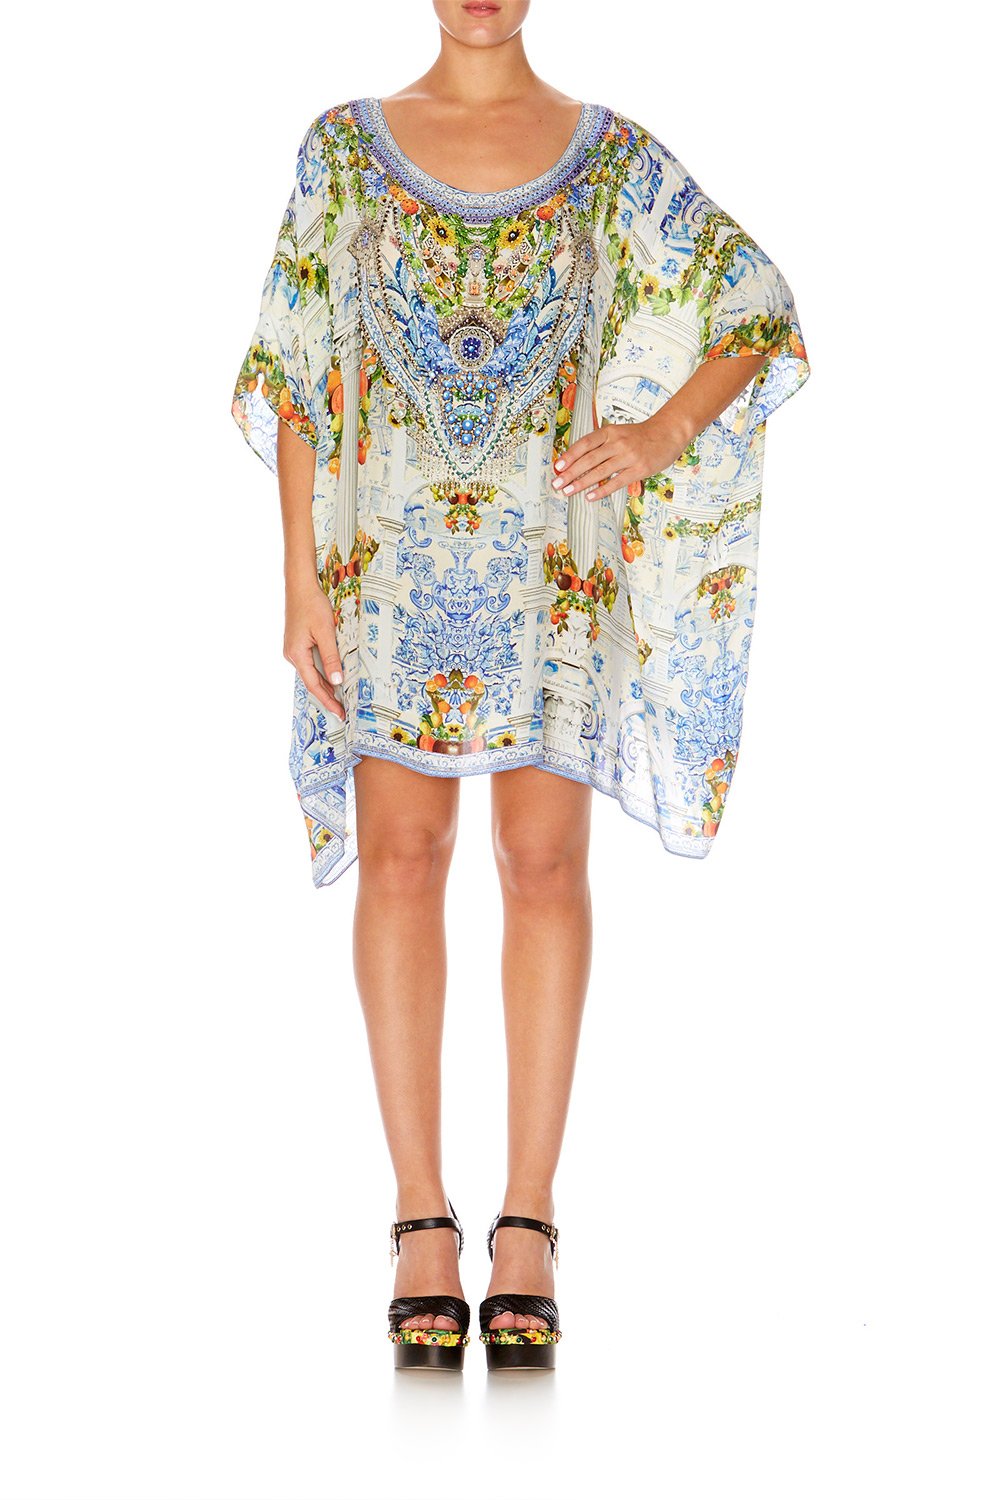 COME AS YOU ARE SHORT ROUND NECK KAFTAN